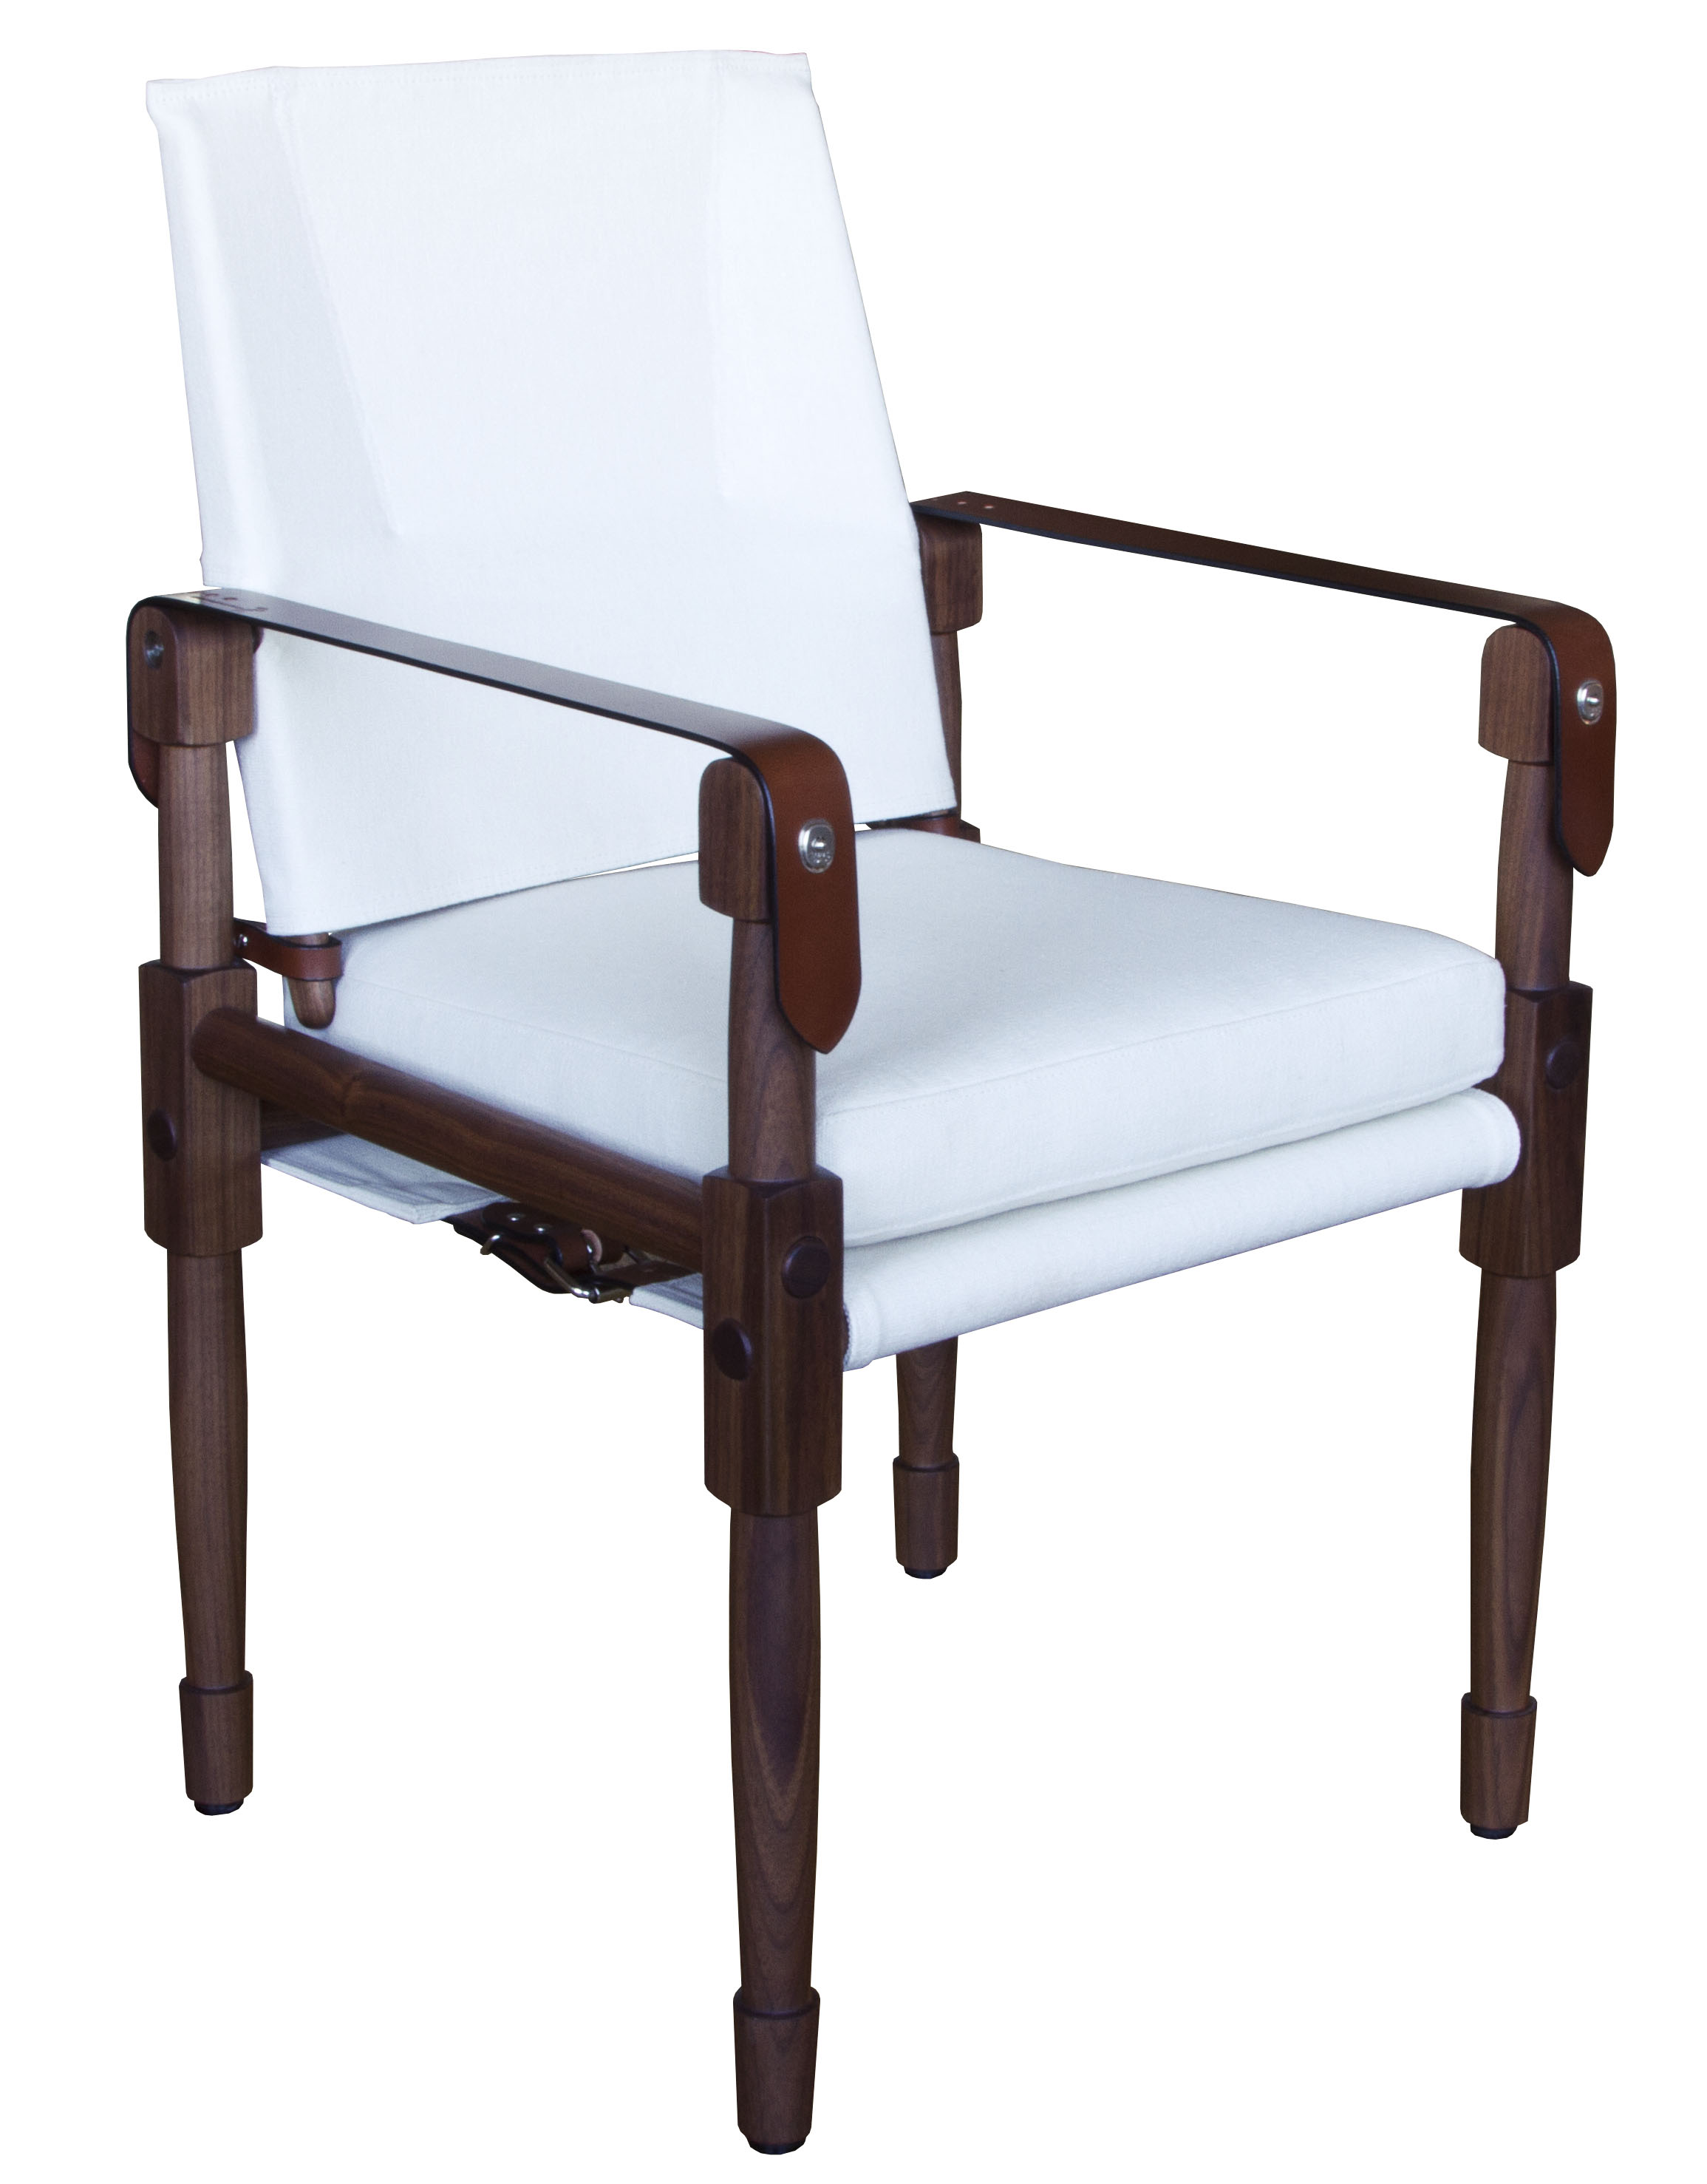  Chatwin Chair with saddle straps 